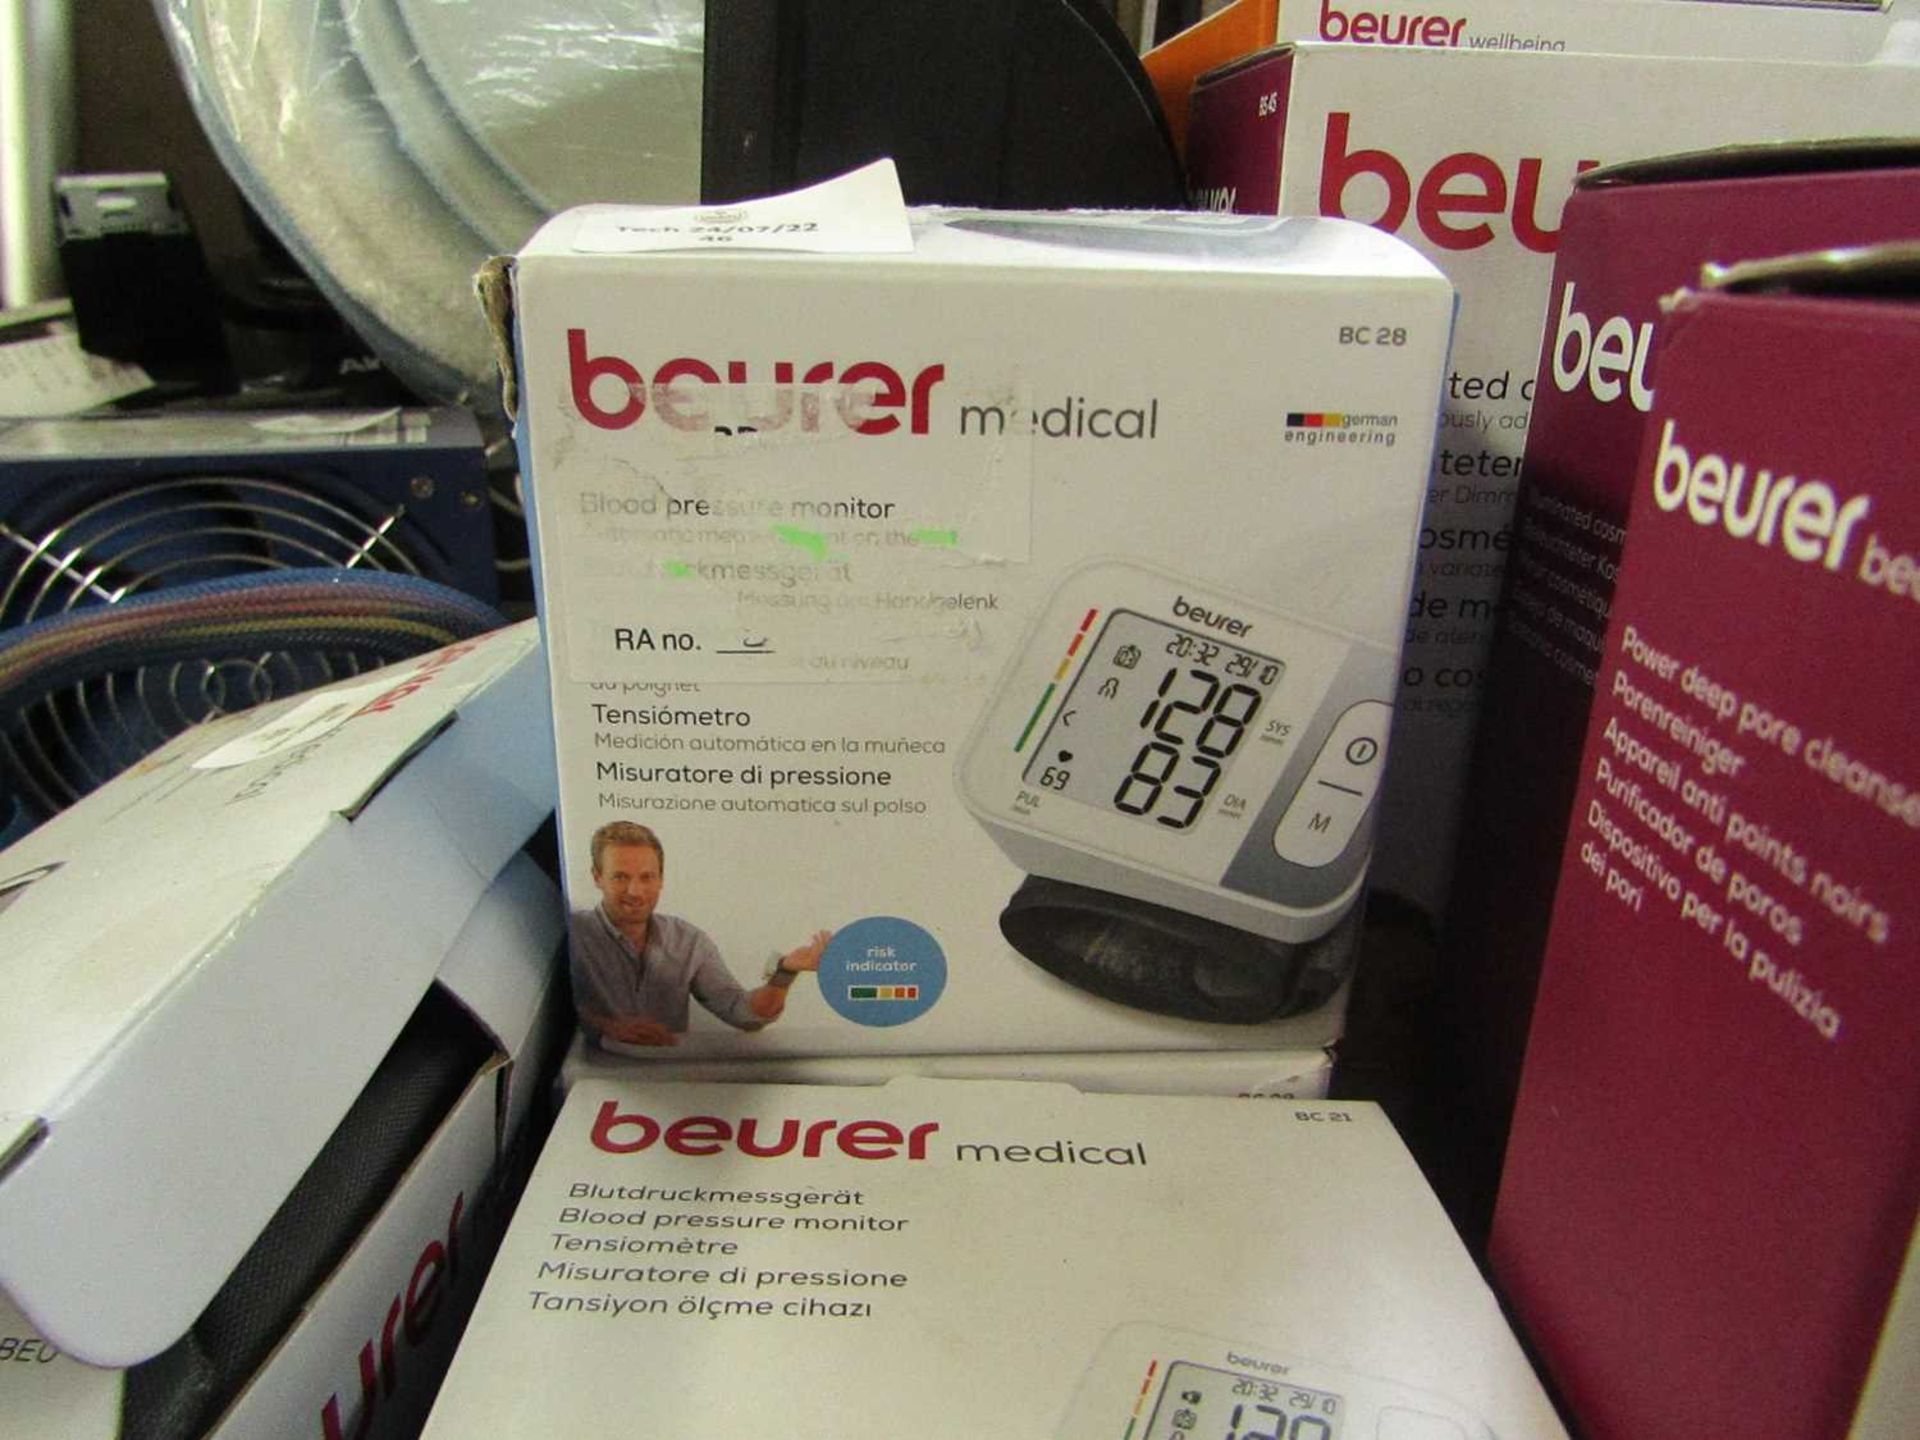 VAT 1x Beurer Medical Blood Pressure Monitor BC28 - This item is graded B - RRP œ24